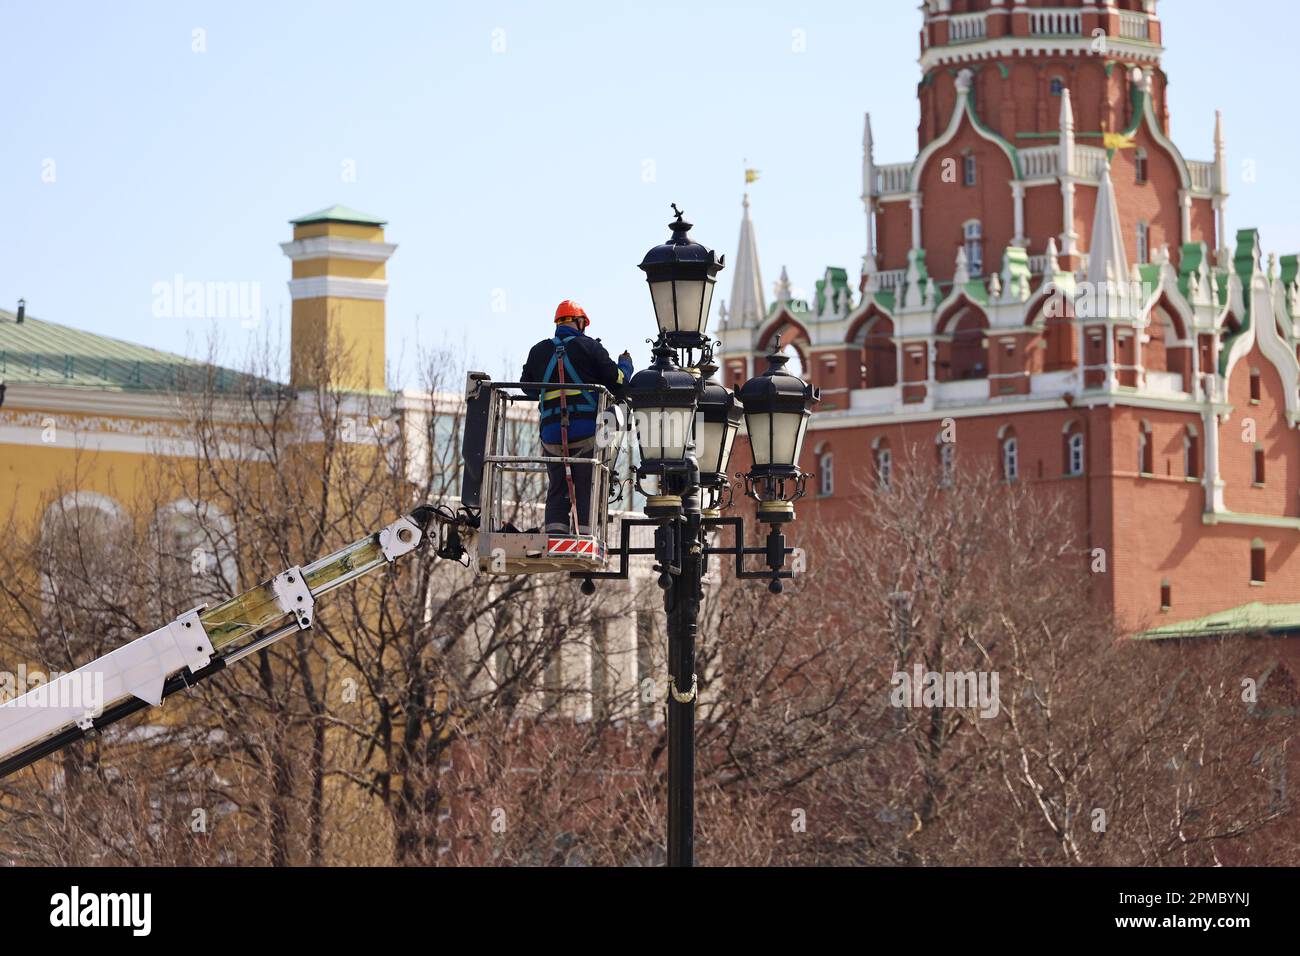 Electrician repairing the street lights on Moscow Kremlin tower background. Worker on the lifting platform near the lantern Stock Photo